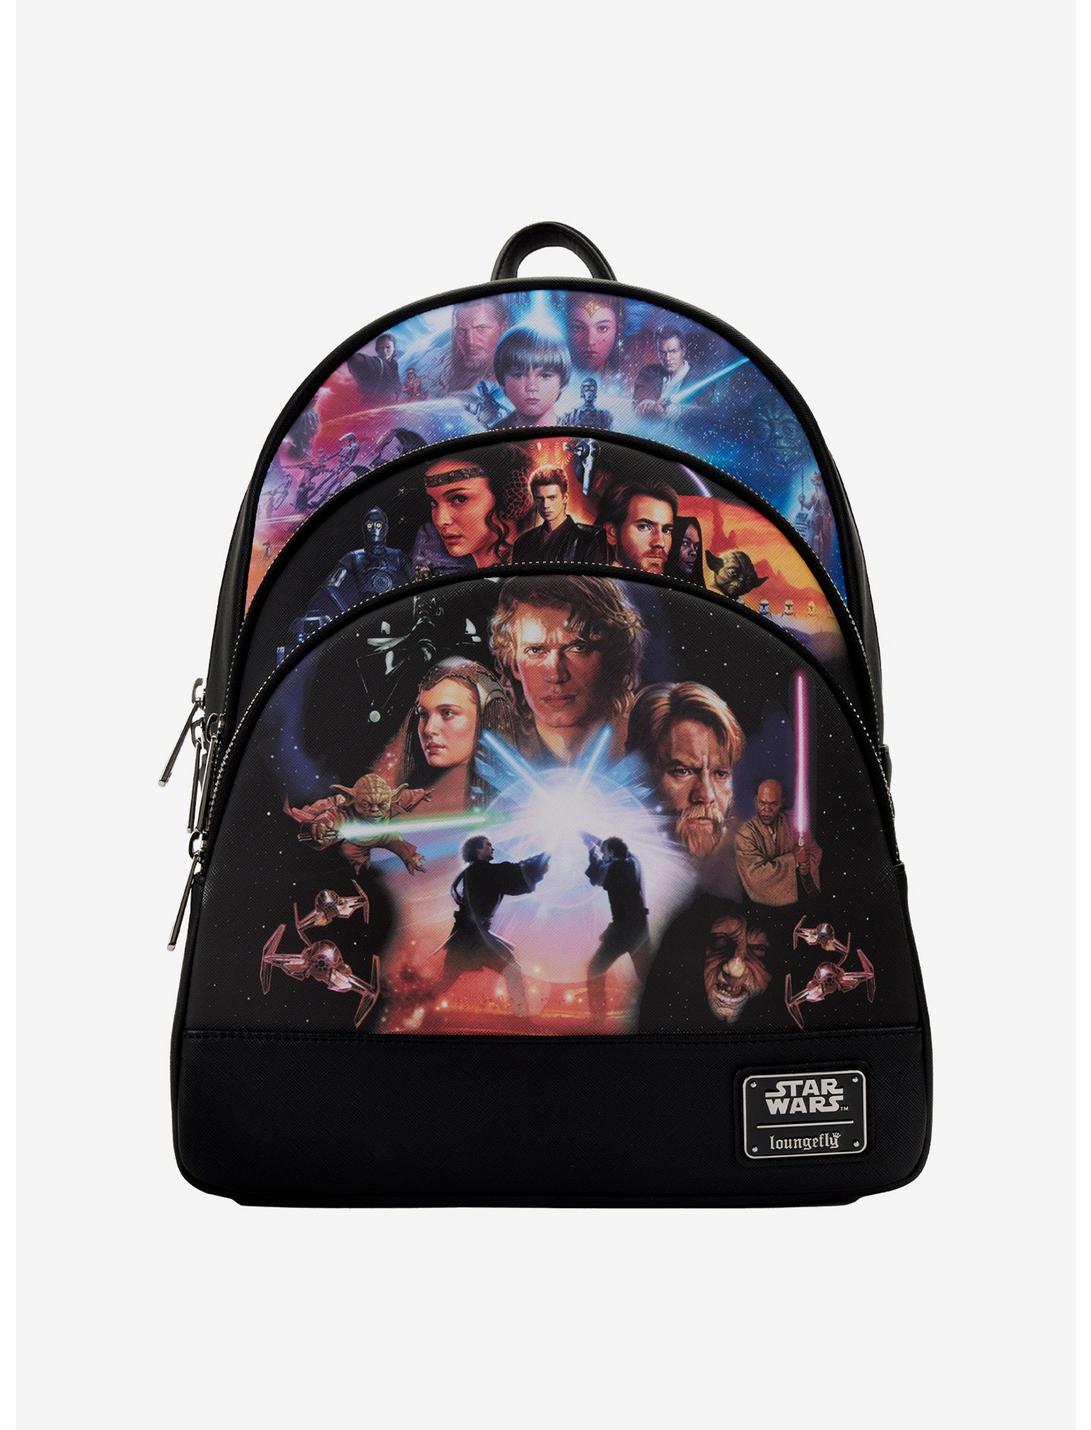 Loungefly Star Wars Prequel Trilogy Mini Backpack, , hi-res